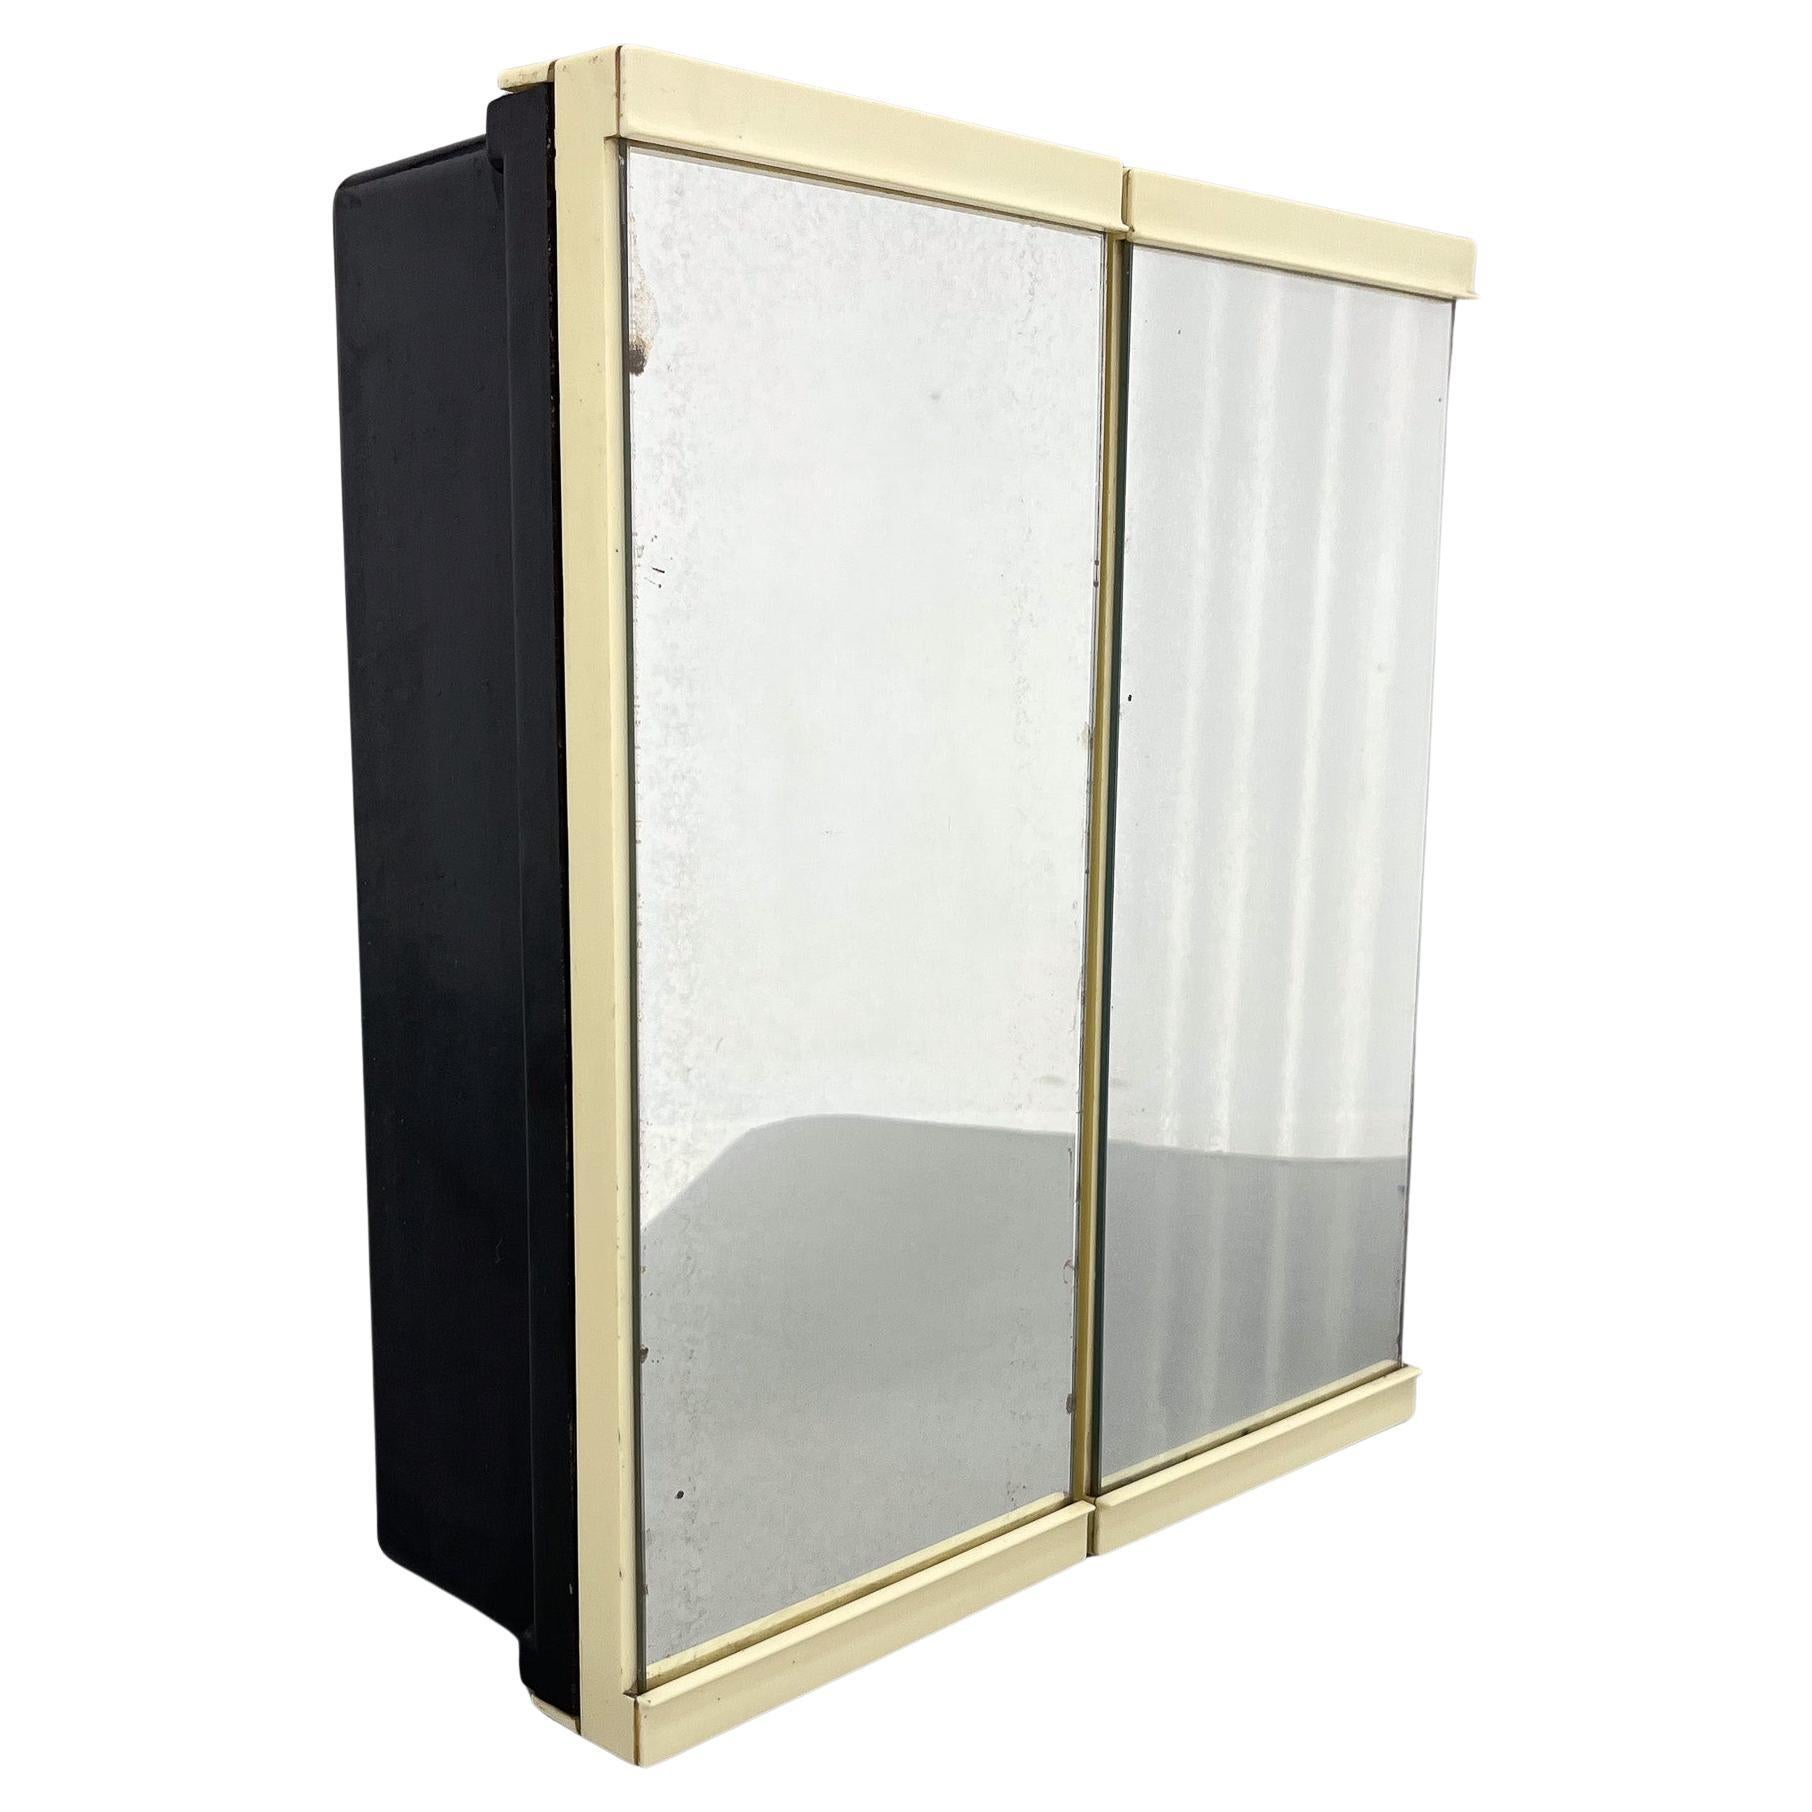 1960's Plastic Bathroom Wall Cabinet with Mirror For Sale